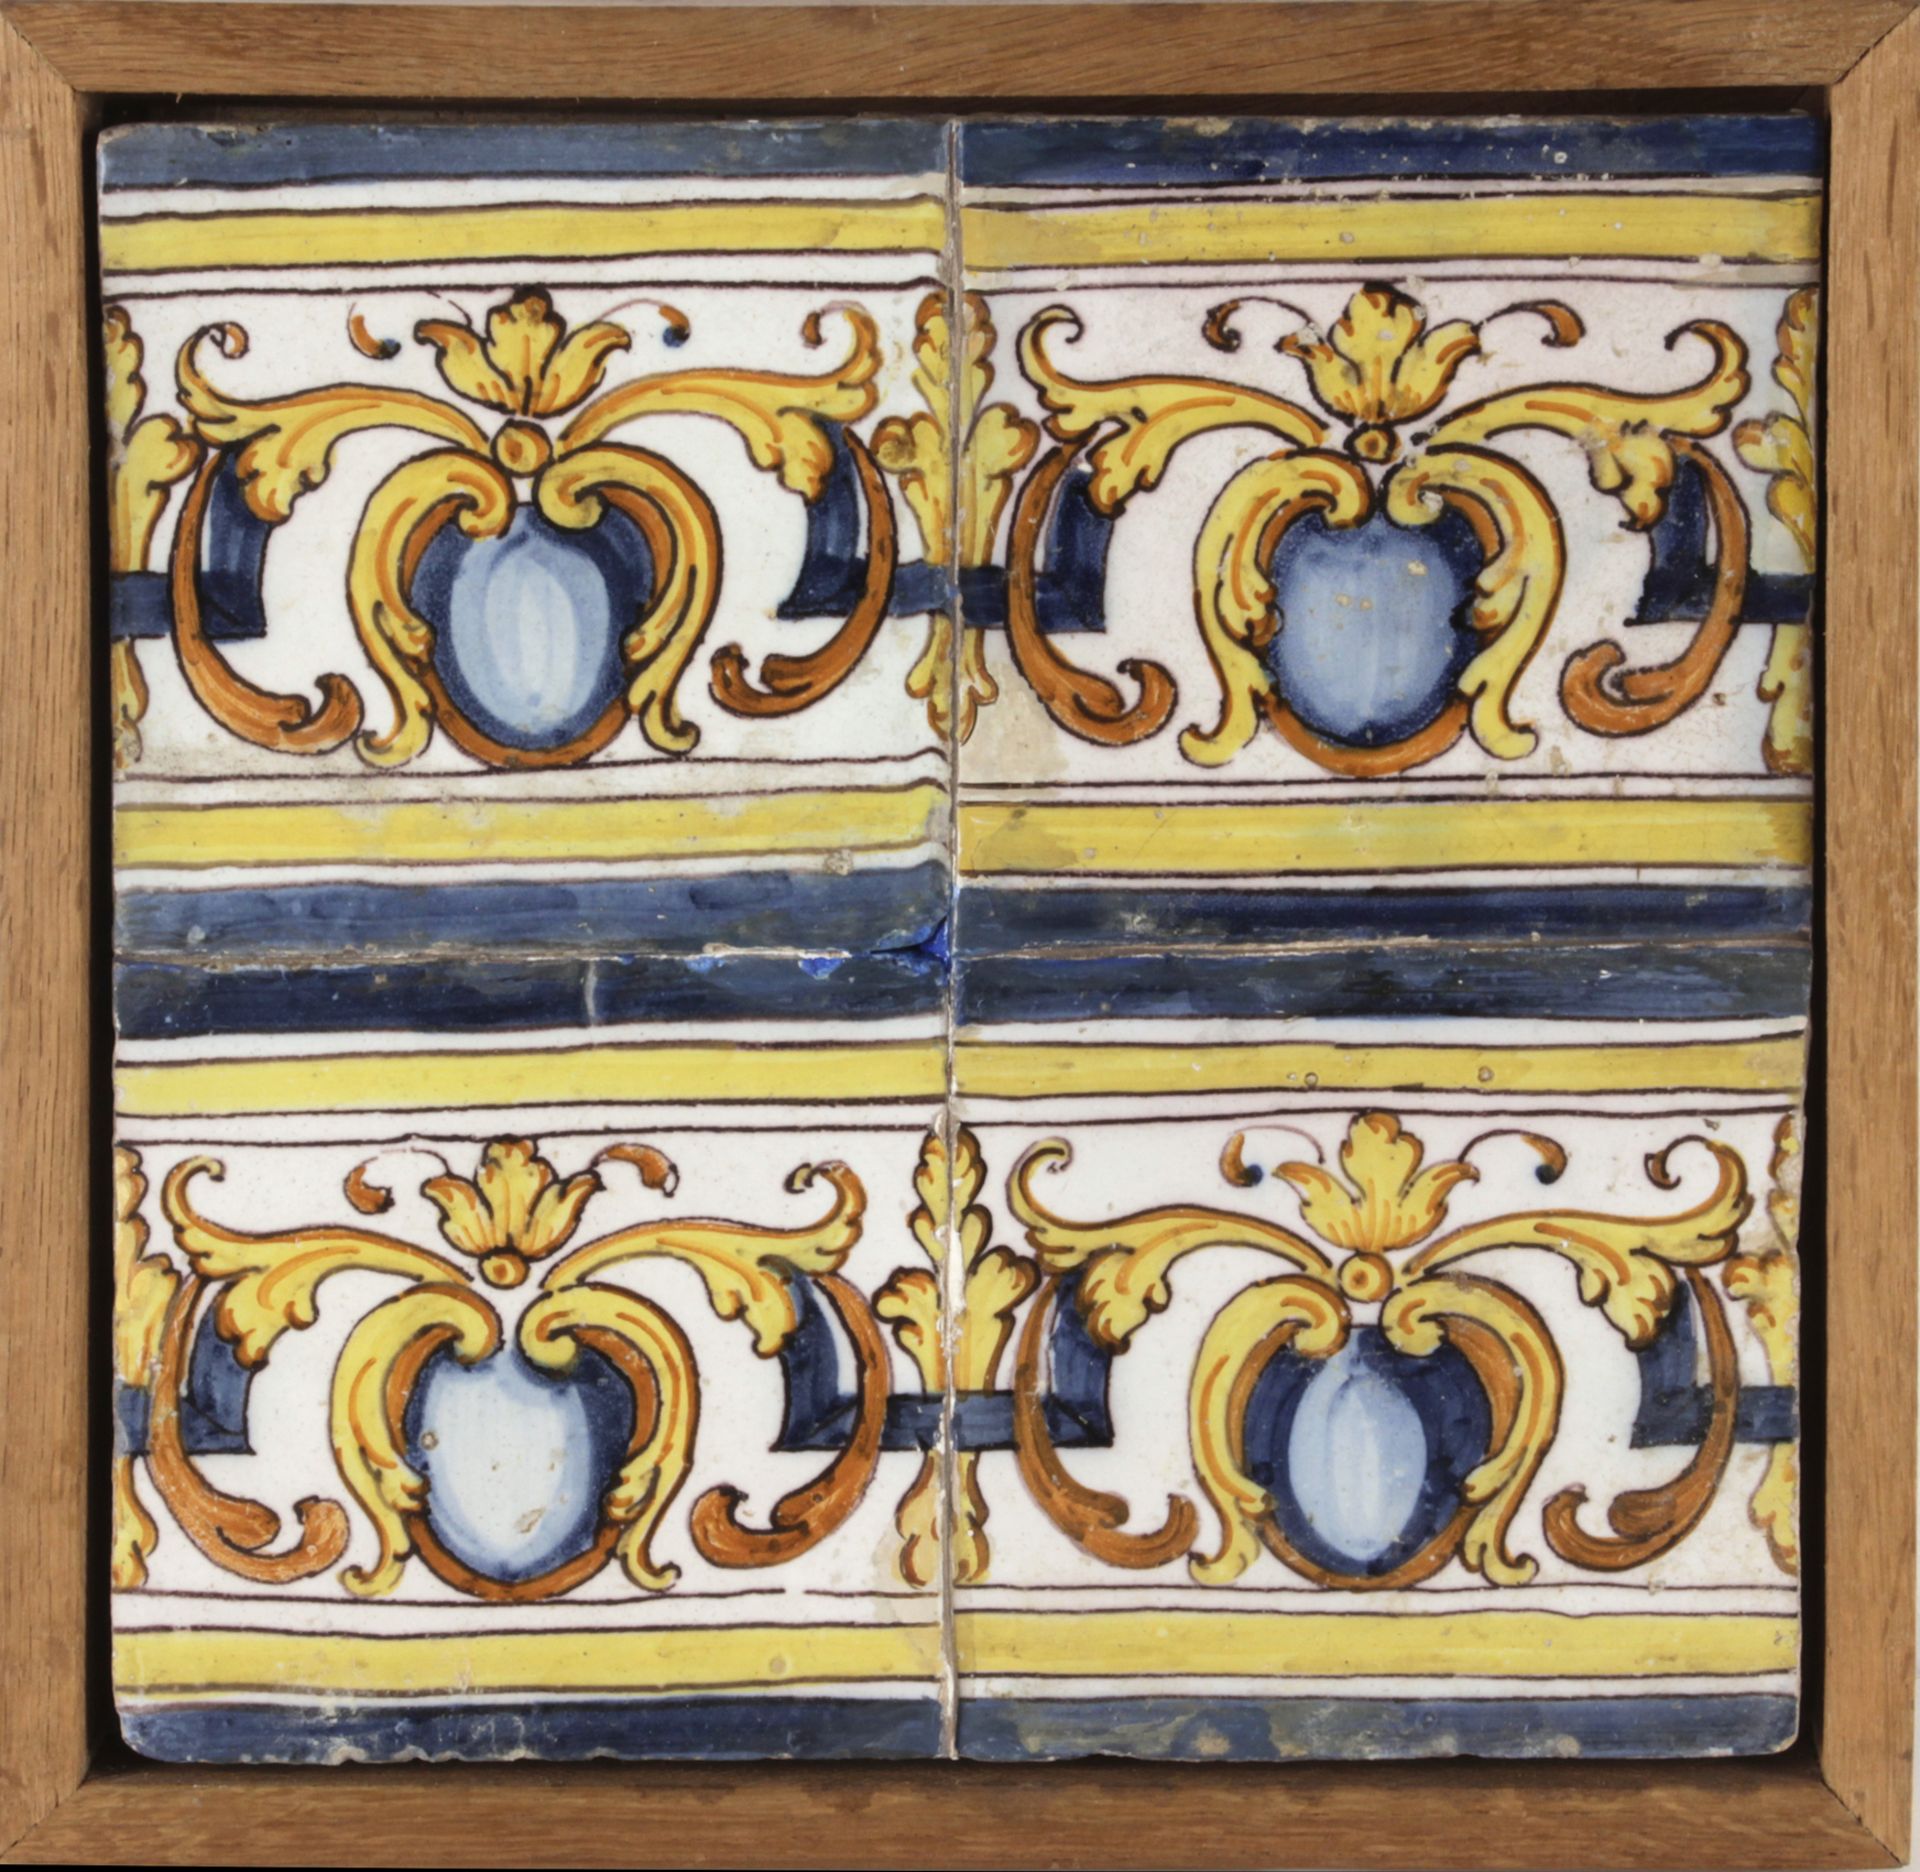 A 17th century wallplaque with four Catalan showing tiles